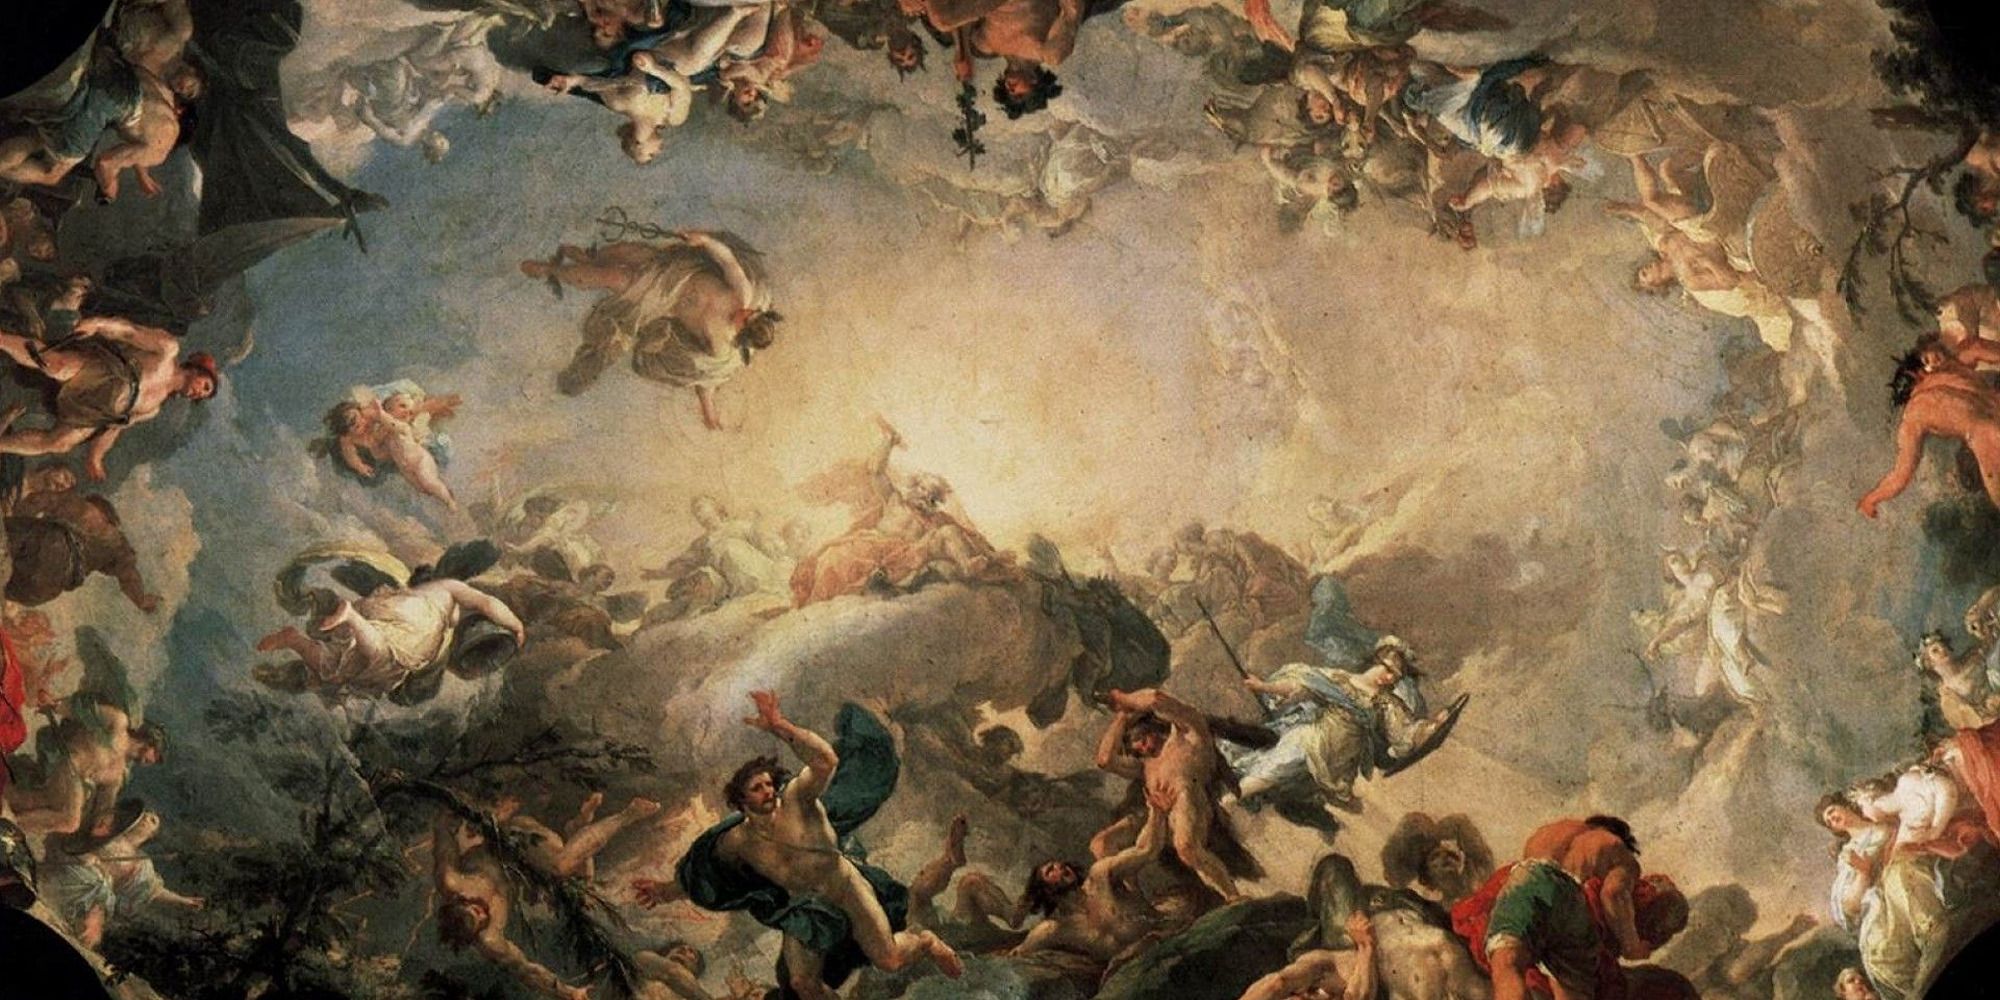 10 Legendary Greek Myths That Could Use an Adaptation